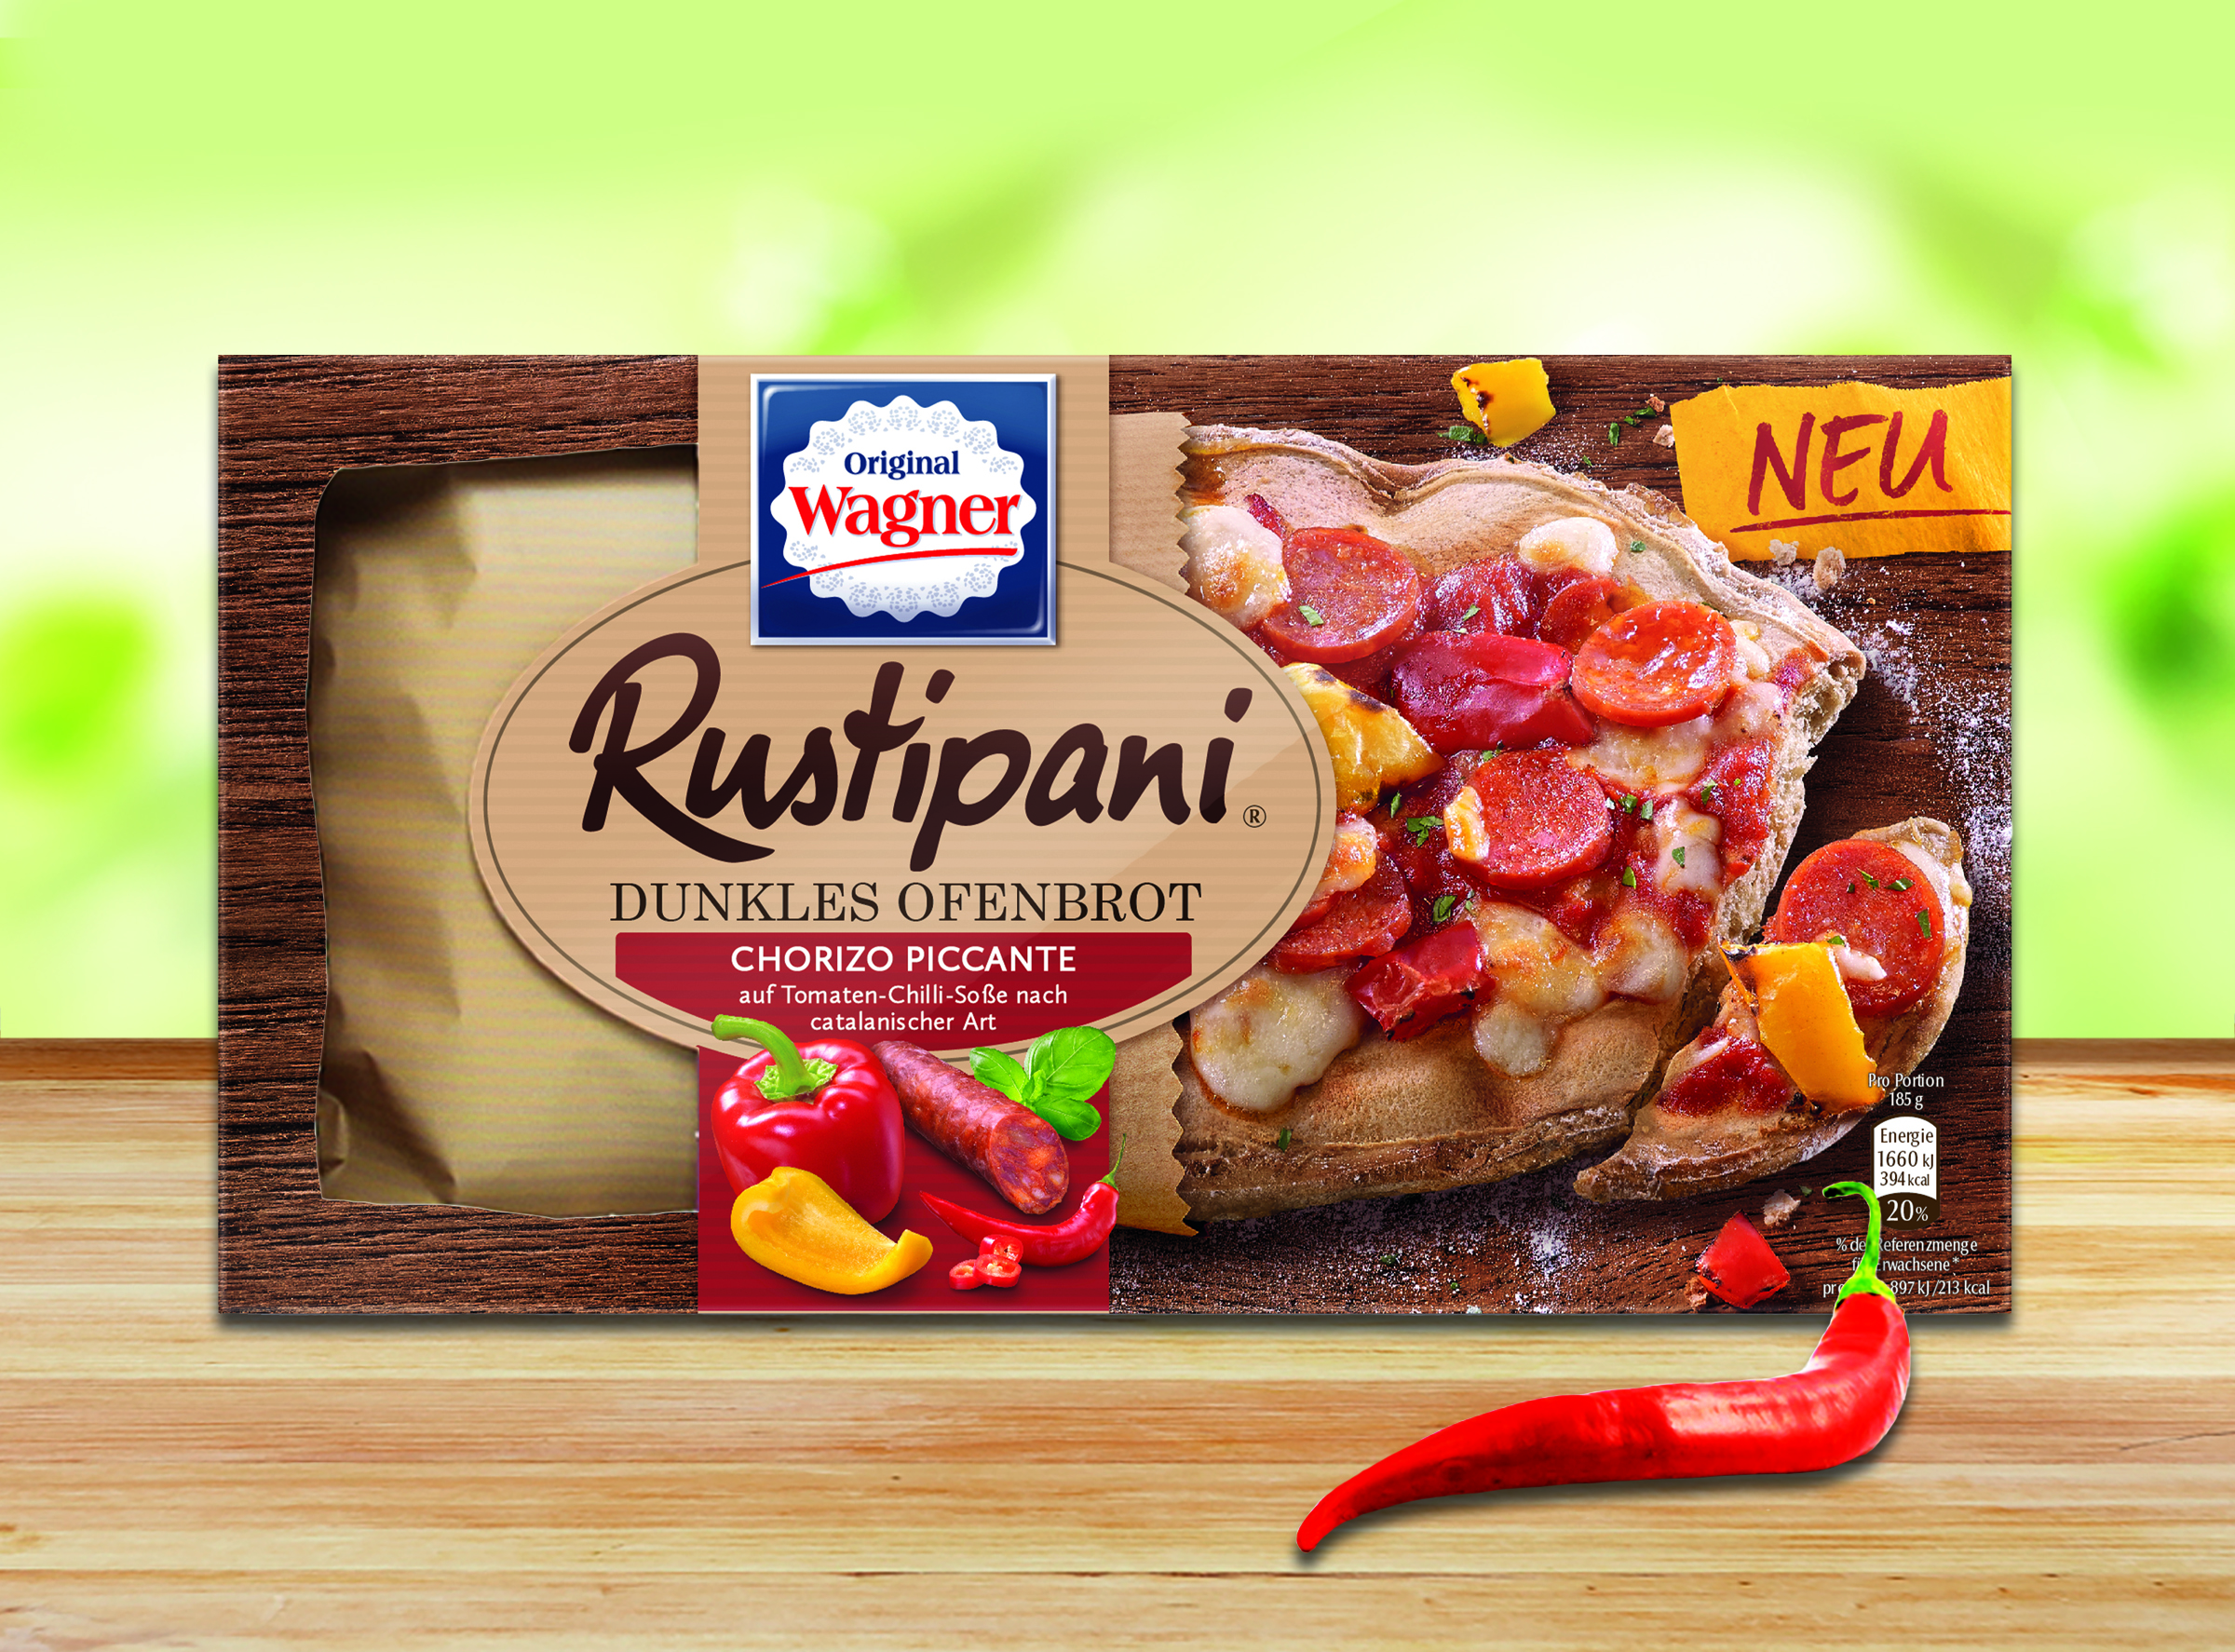 B+P Creality – Rustipani Topped Baguette Redesign